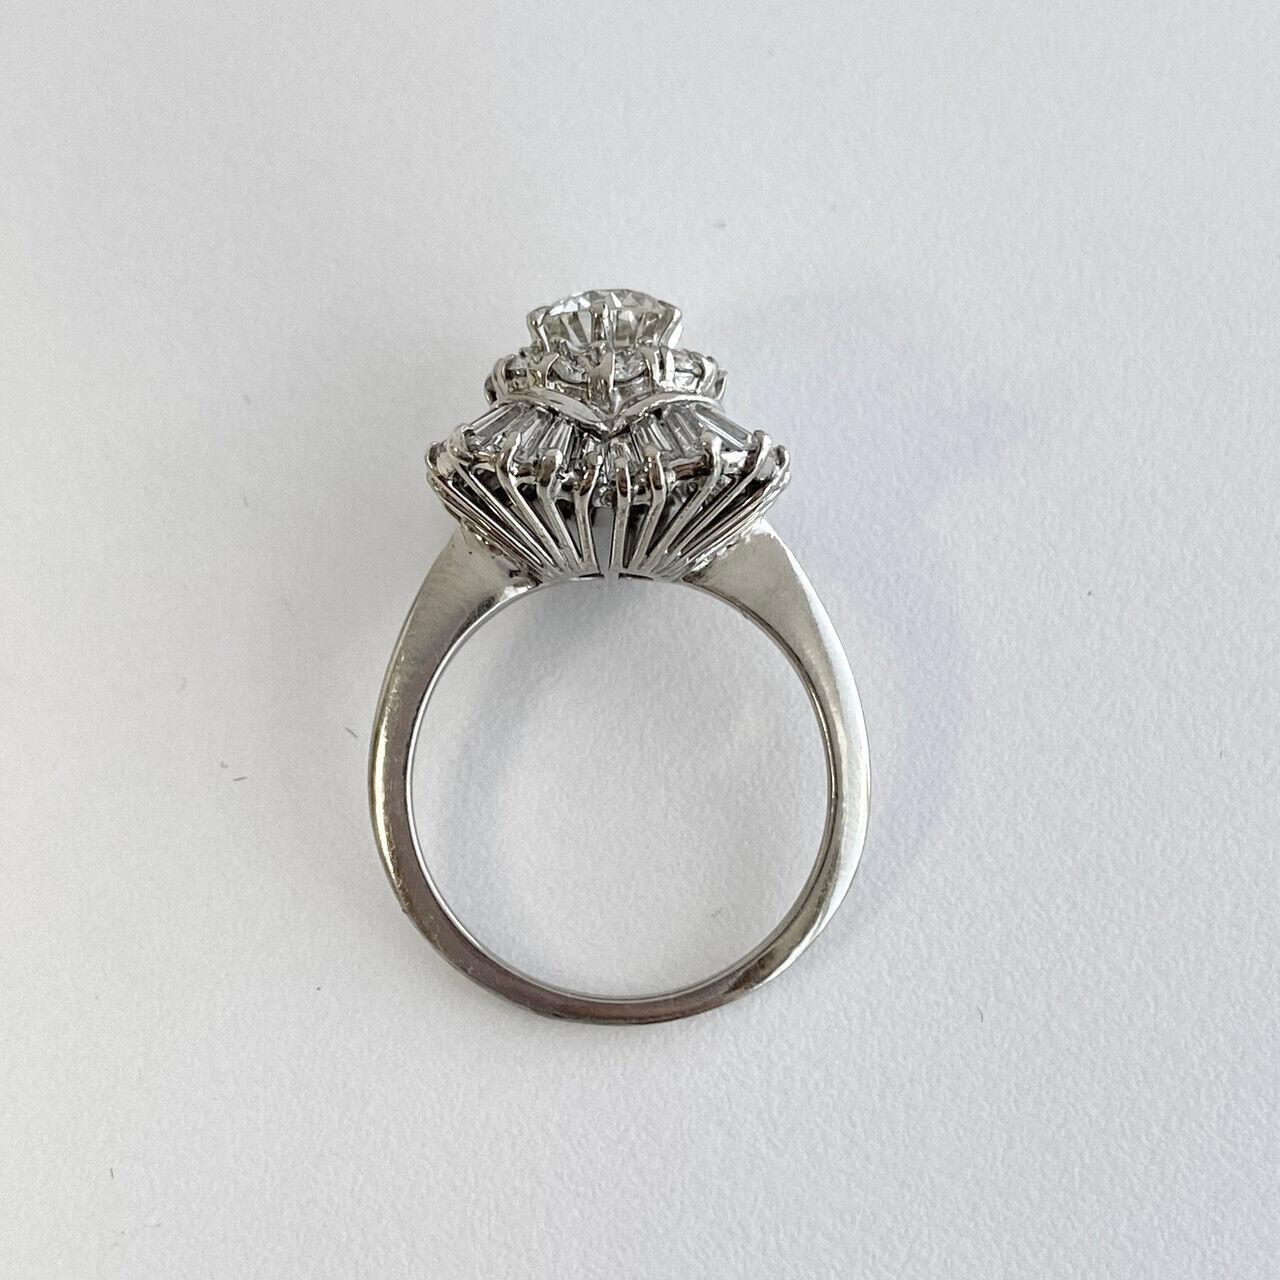 Vintage 14k White Gold Diamond Ring with Old European Cut Diamond In Excellent Condition For Sale In Los Angeles, CA